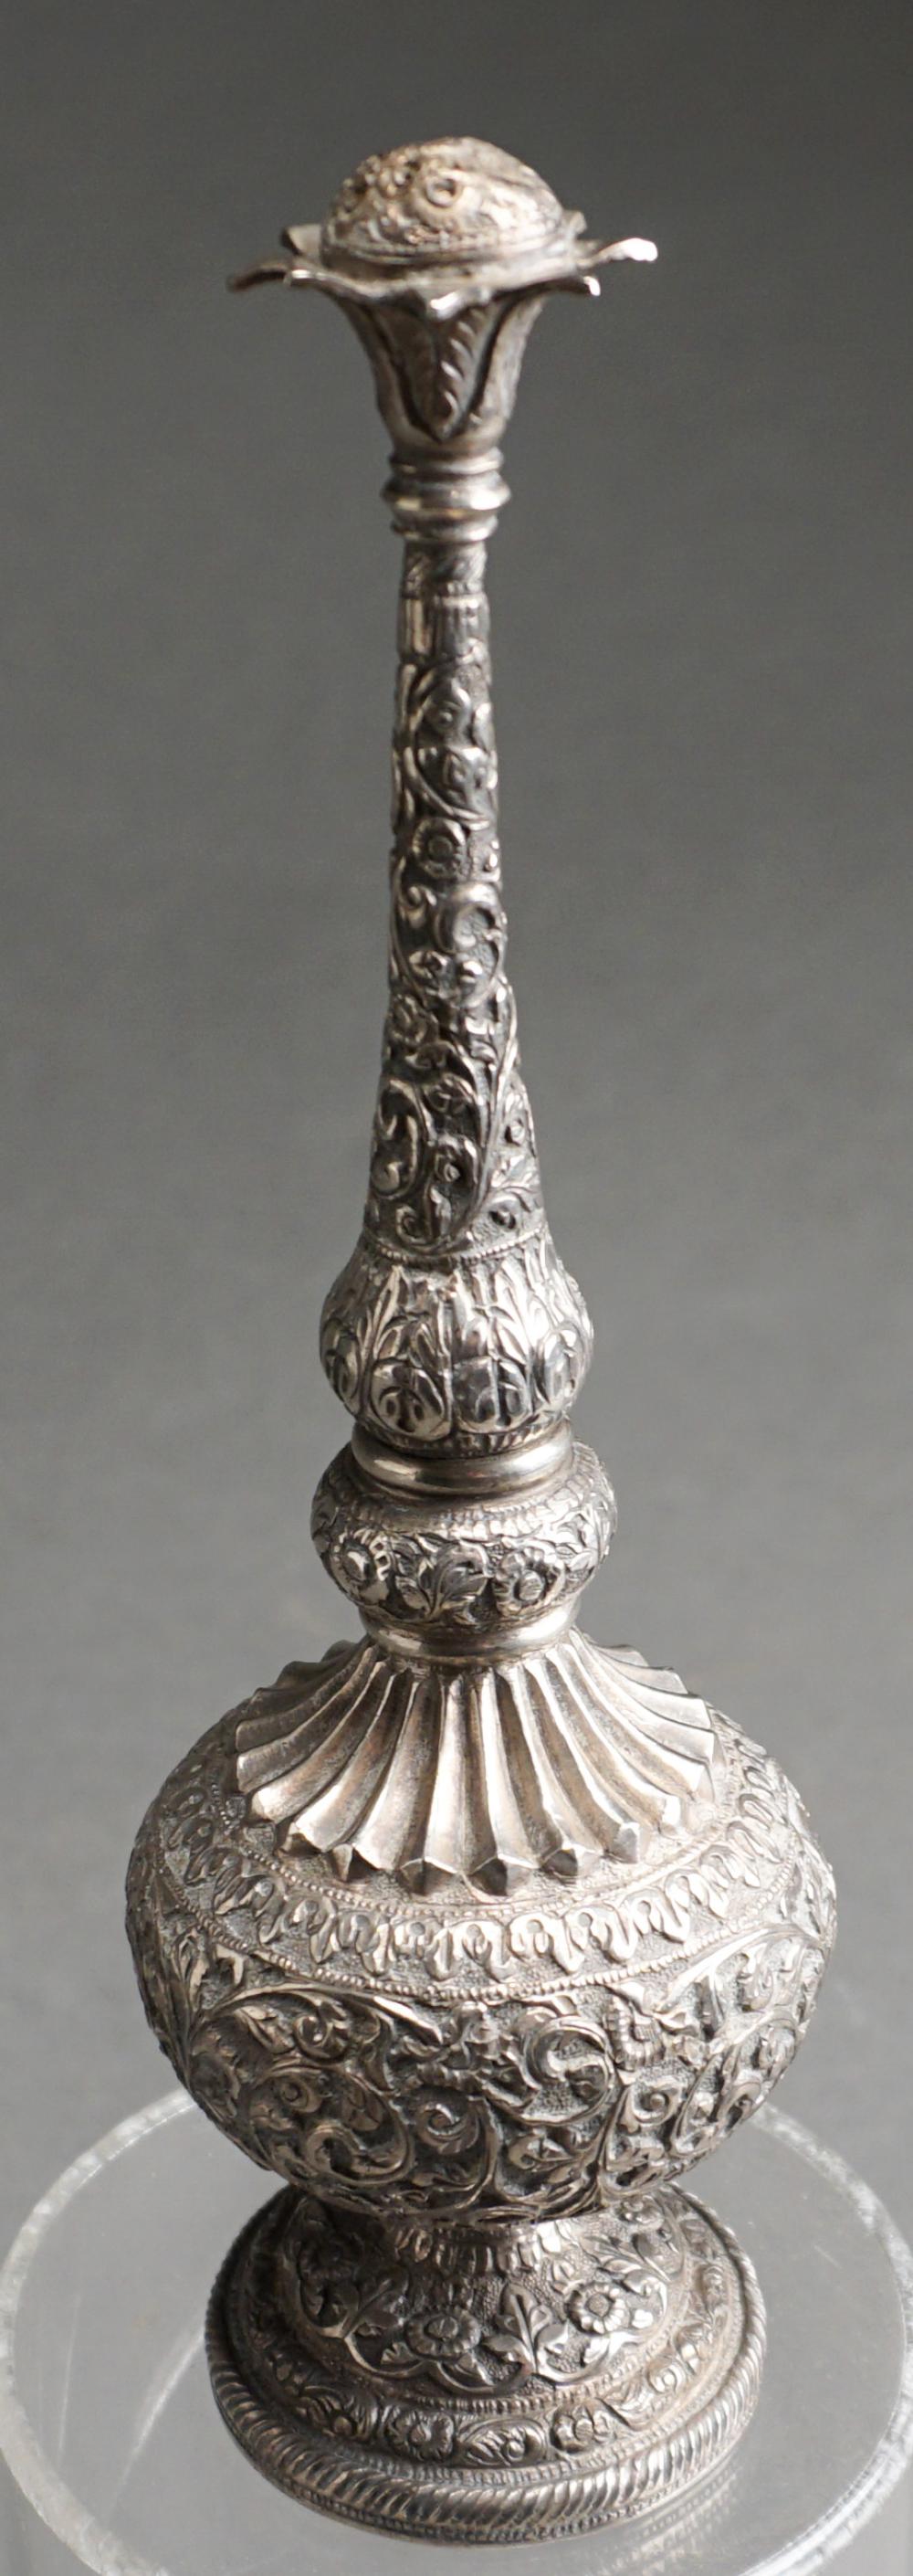 INDO-PERSIAN HIGH-PURITY SILVER